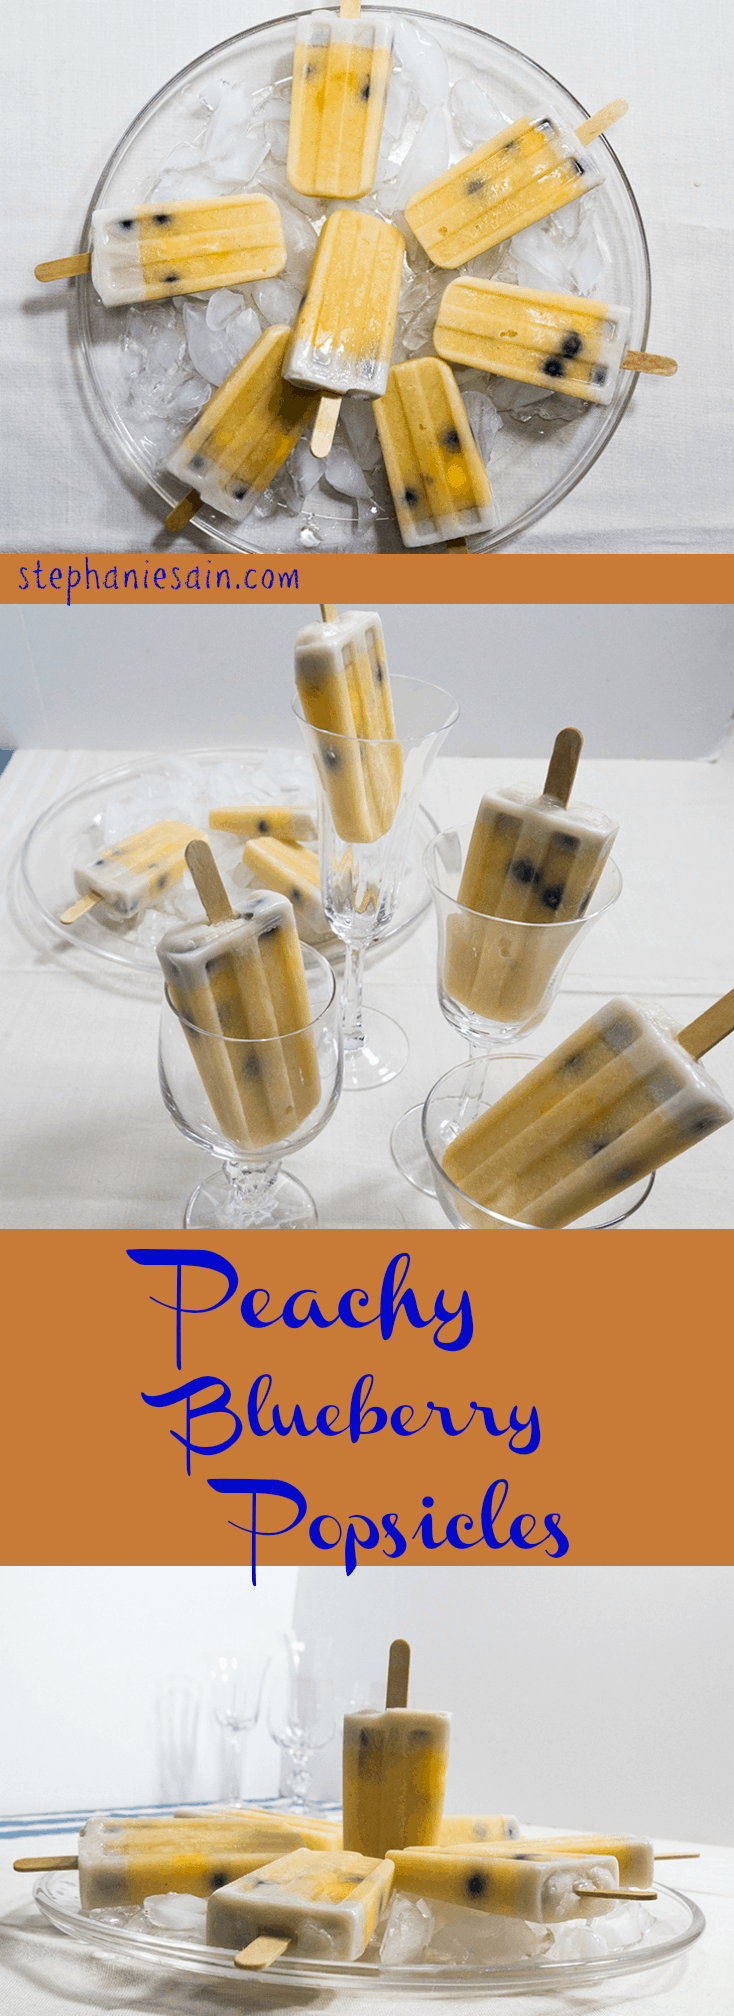 Peachy Blueberry Popsicles are a healthy, tasty summertime treat. Only three ingredients and Vegan and Gluten Free.